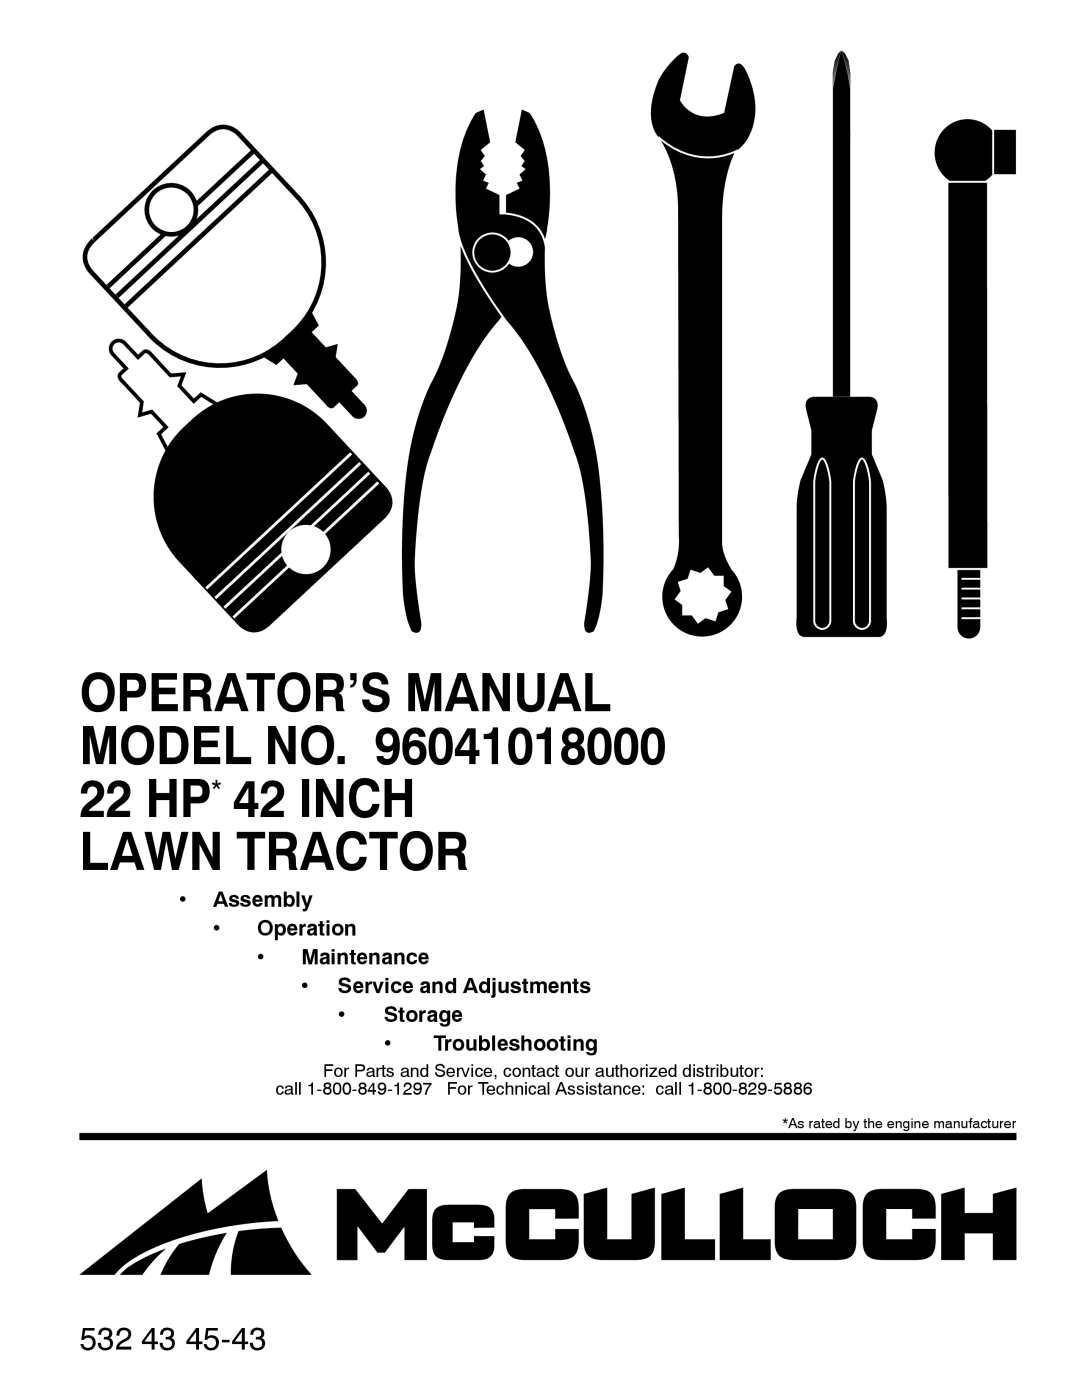 McCulloch 96041018000 manual OPERATOR’S MANUAL MODEL NO 22 HP* 42 INCH LAWN TRACTOR, 532 43, Troubleshooting 